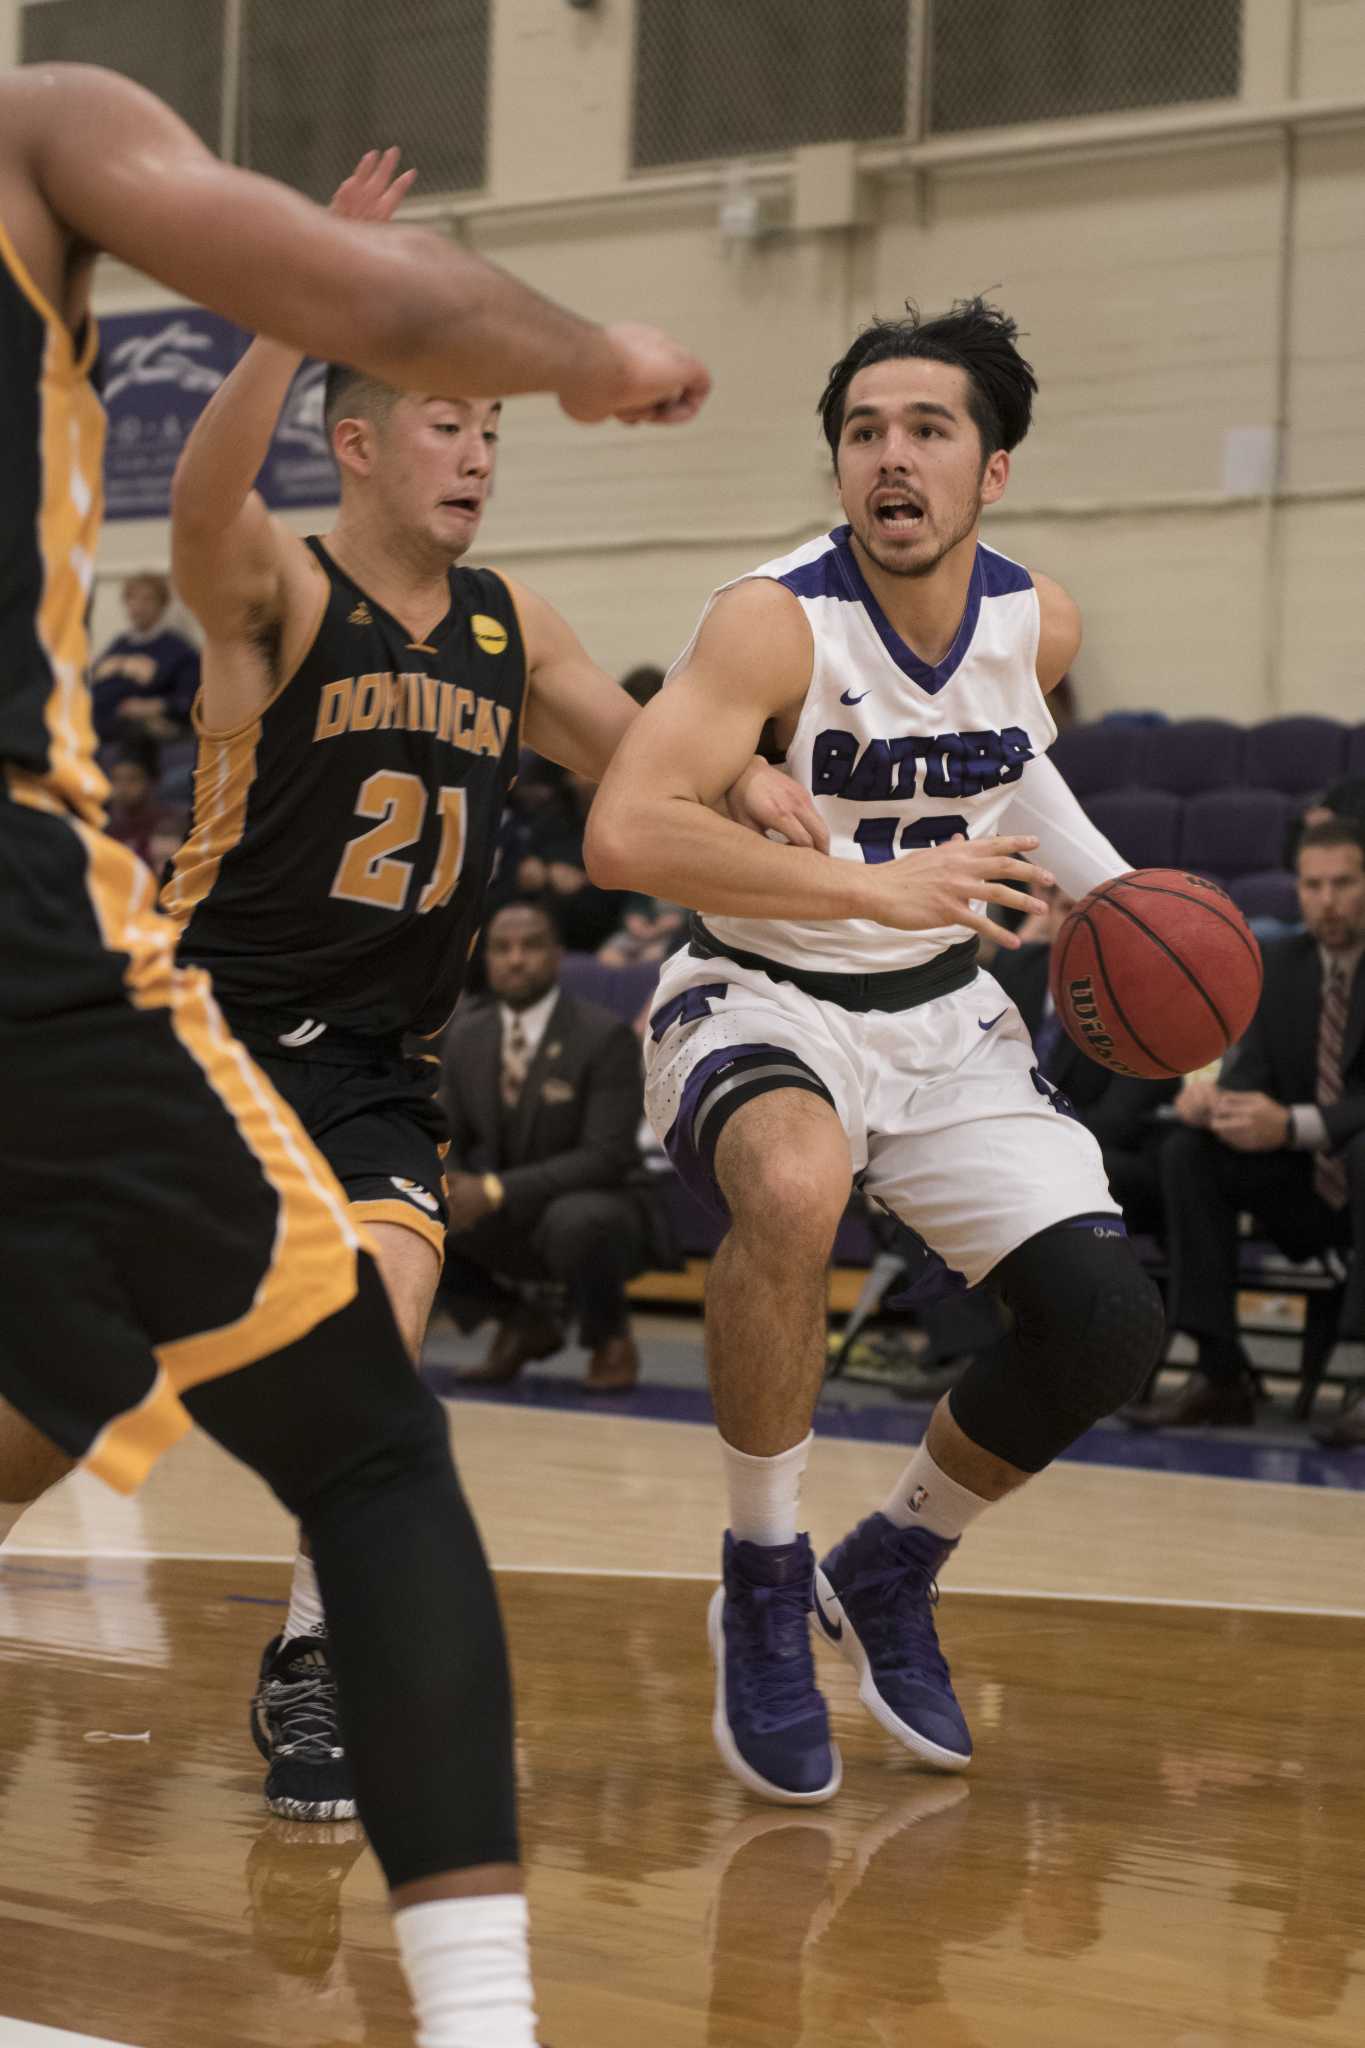 SF State Gators graduate student guard Parker Uu (13) dribbles toward the Dominican Penguins basket during the Gators 91-67 win against the Penguins at the Swamp on Saturday, Nov. 12, 2016. (Kin Lee/Xpress)